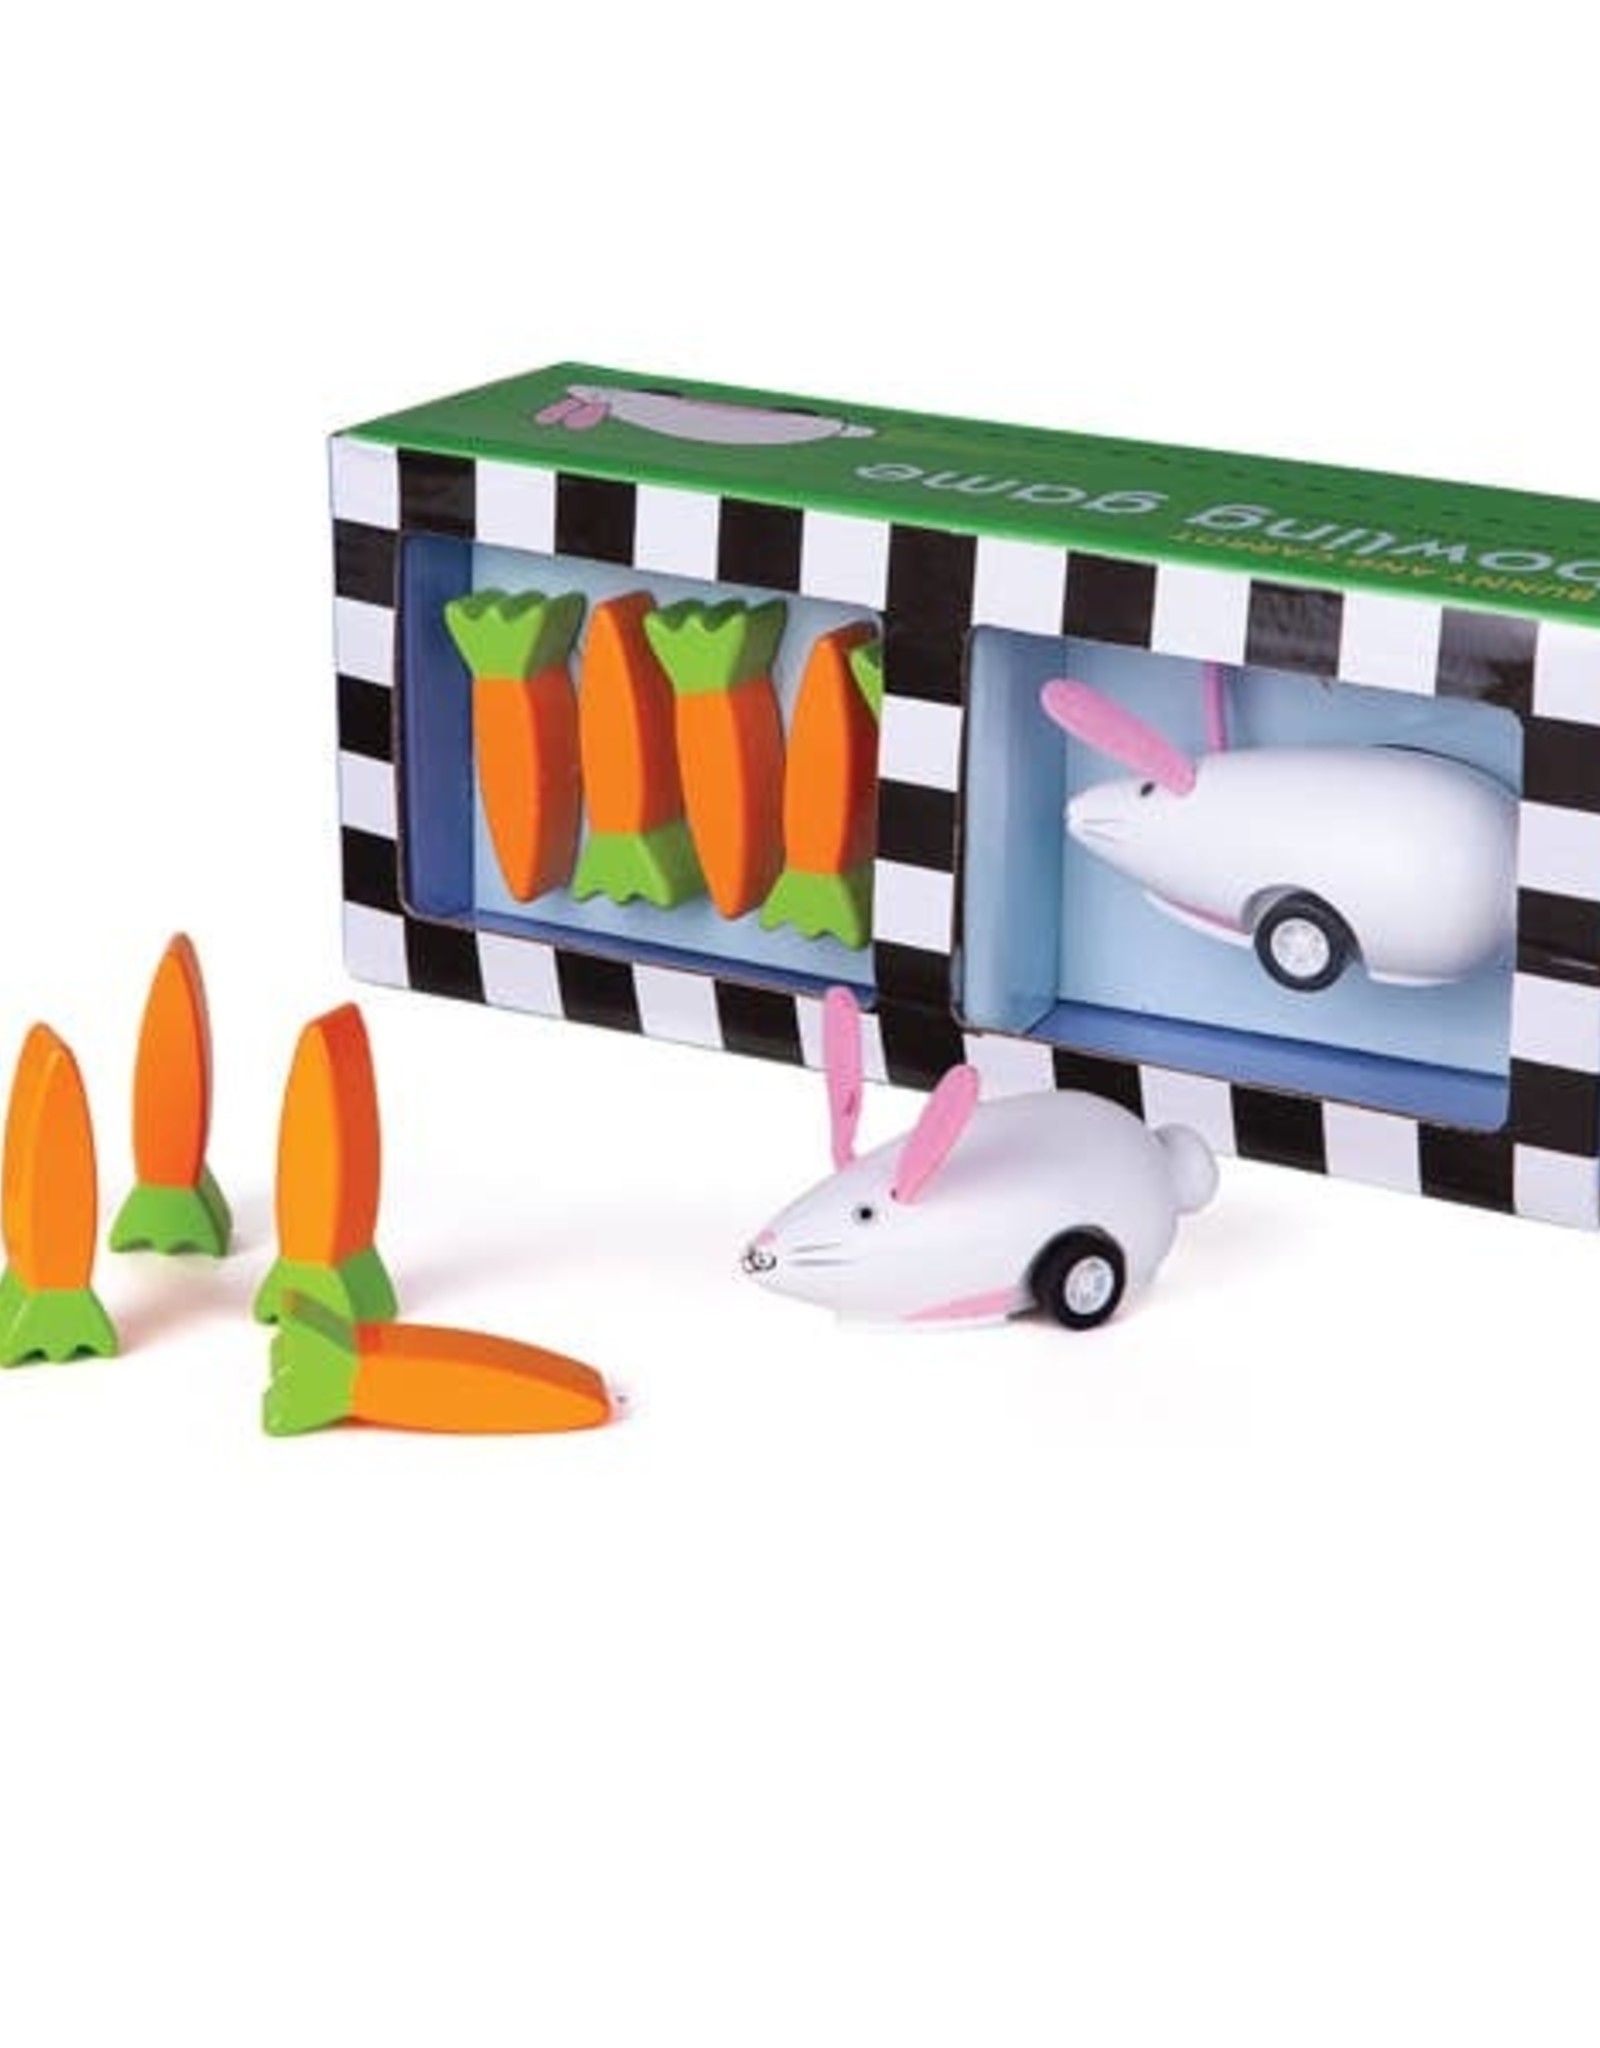 Jack Rabbit Creations Rabbit and Carrot Bowling Toy